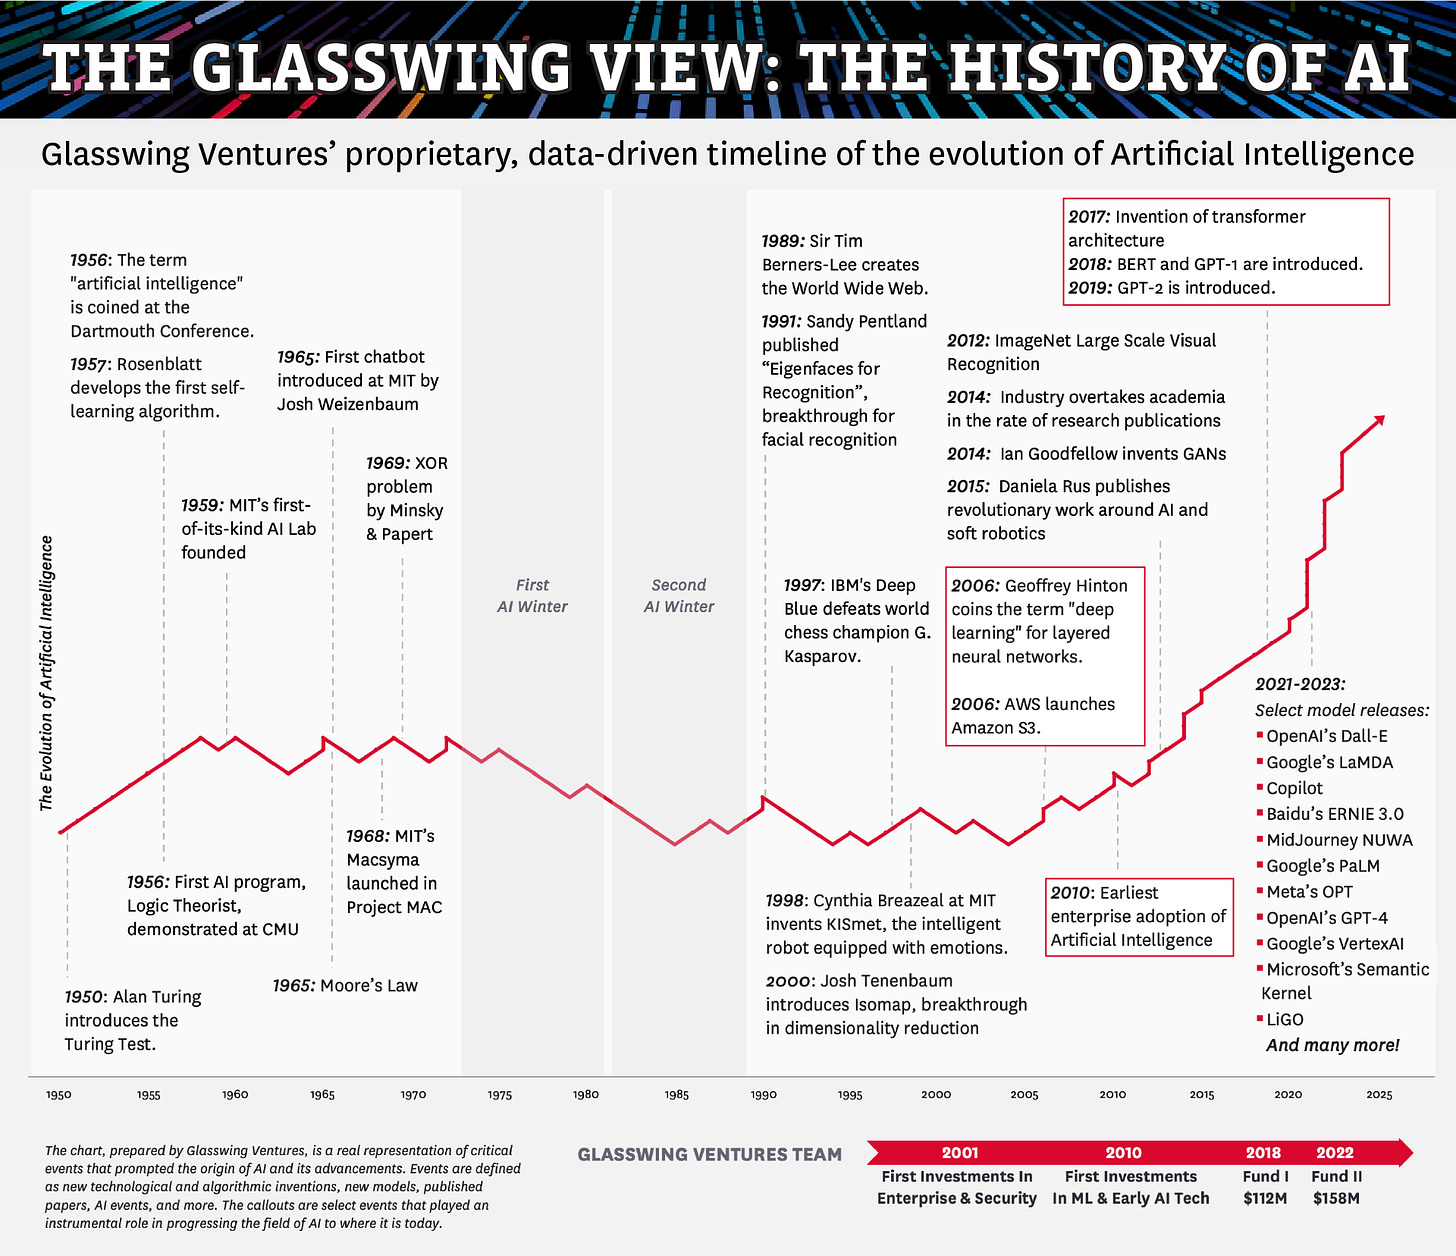 THE HISTORY OF ARTIFICIAL INTELLIGENCE | Glasswing Ventures